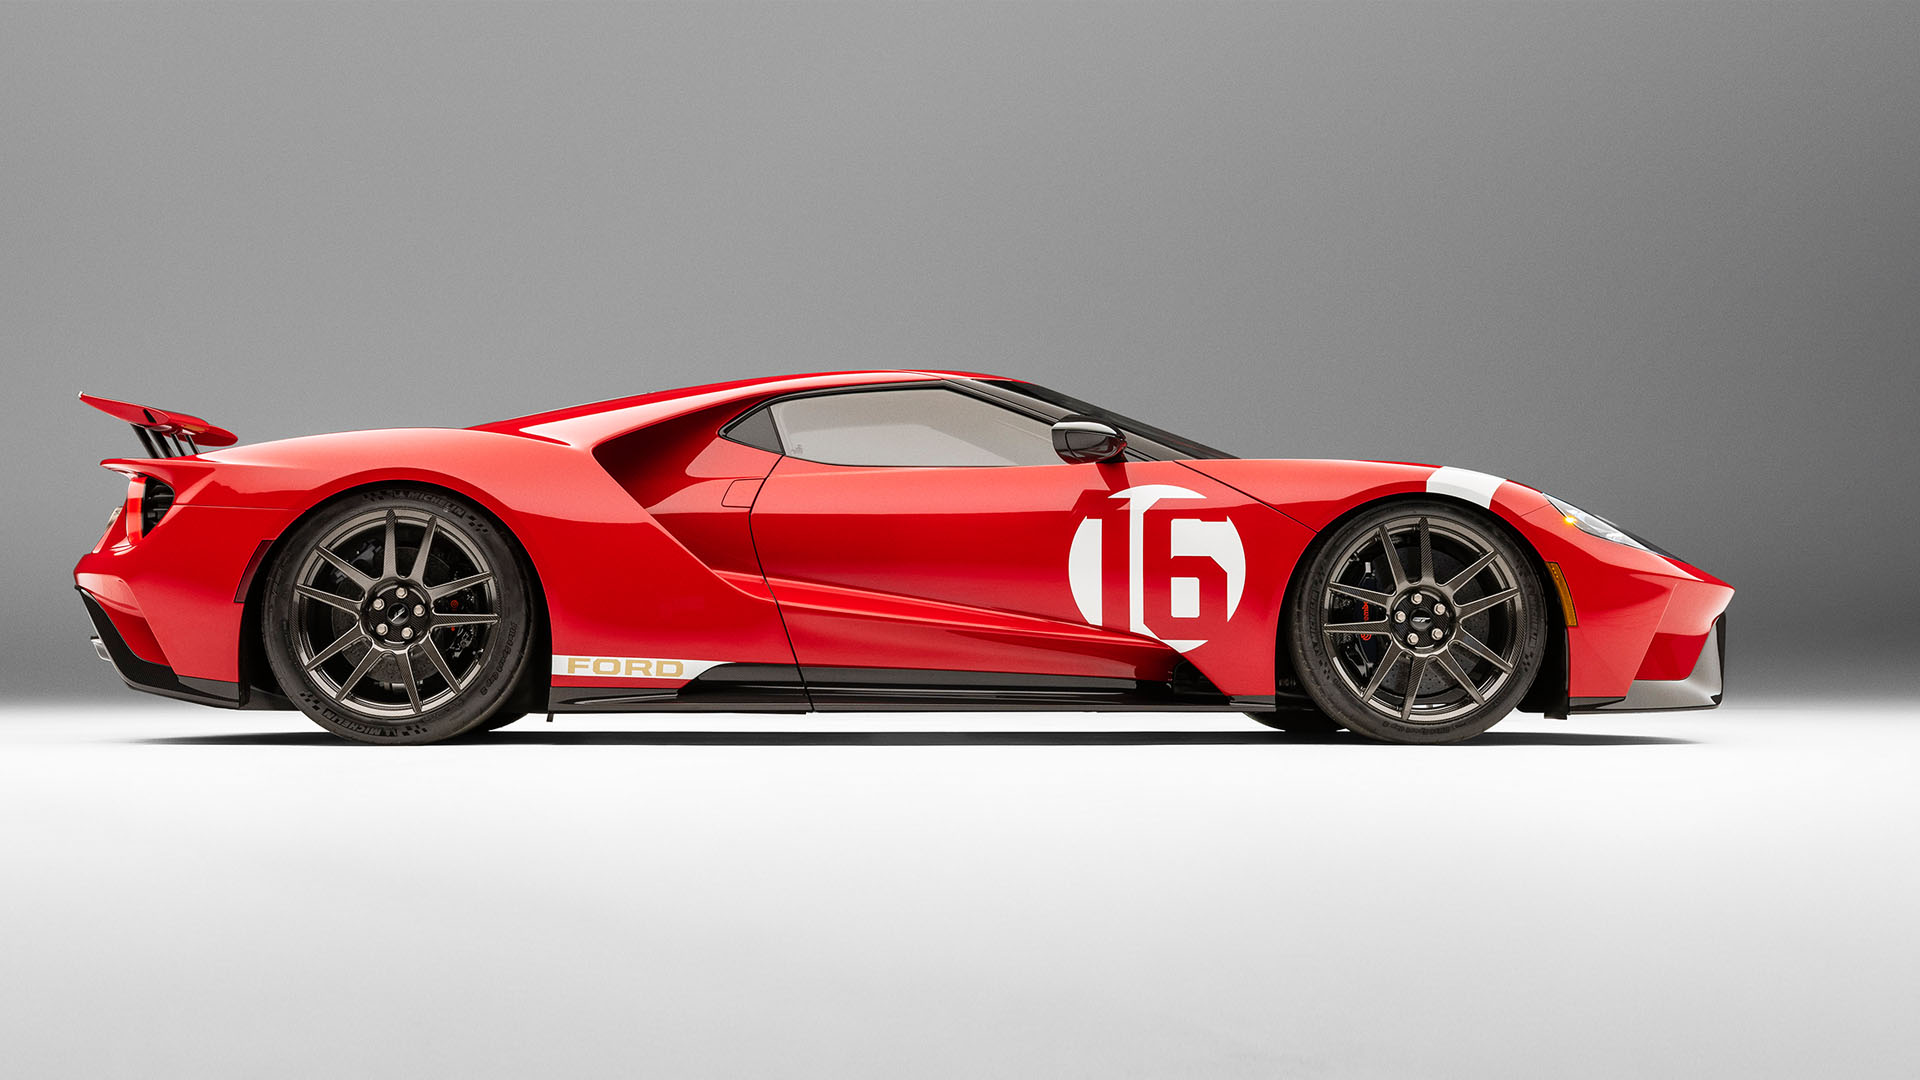 The 2022 Ford GT Alan Mann Heritage Edition